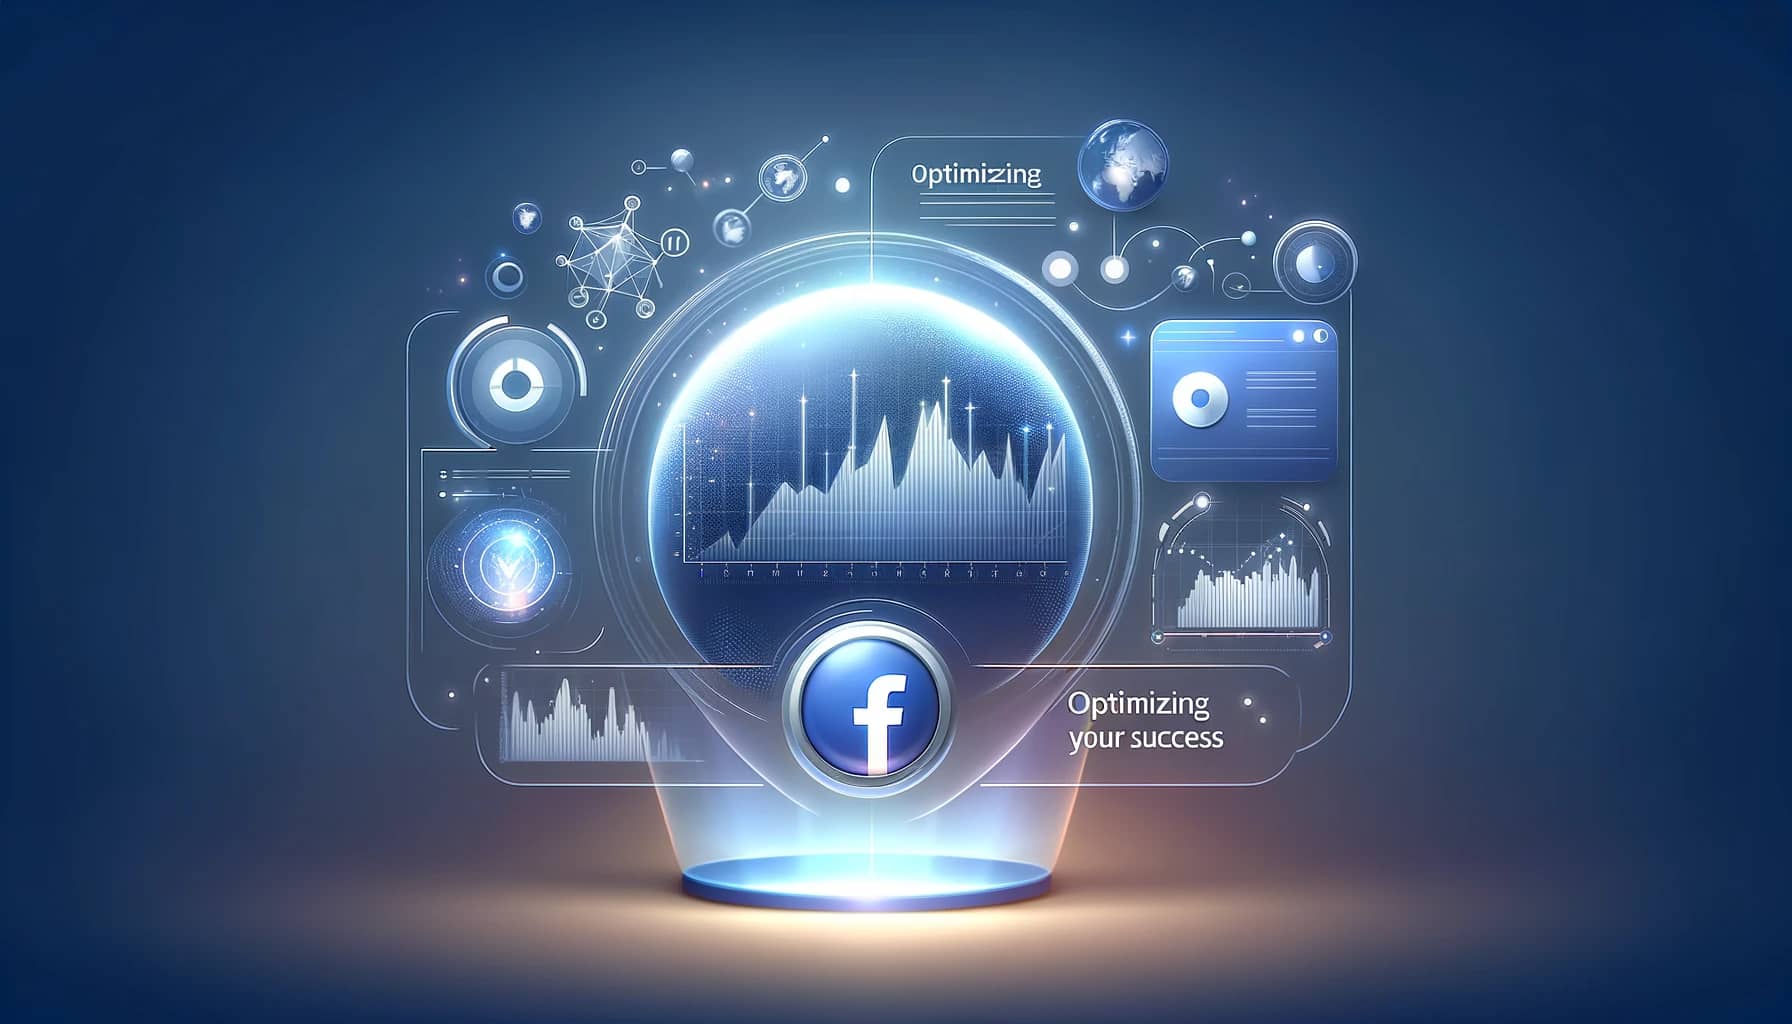 Minimalistic HERO section image showcasing 'Analytics and Reporting for Facebook Ads', with abstract data graphs and a subtle Facebook icon.